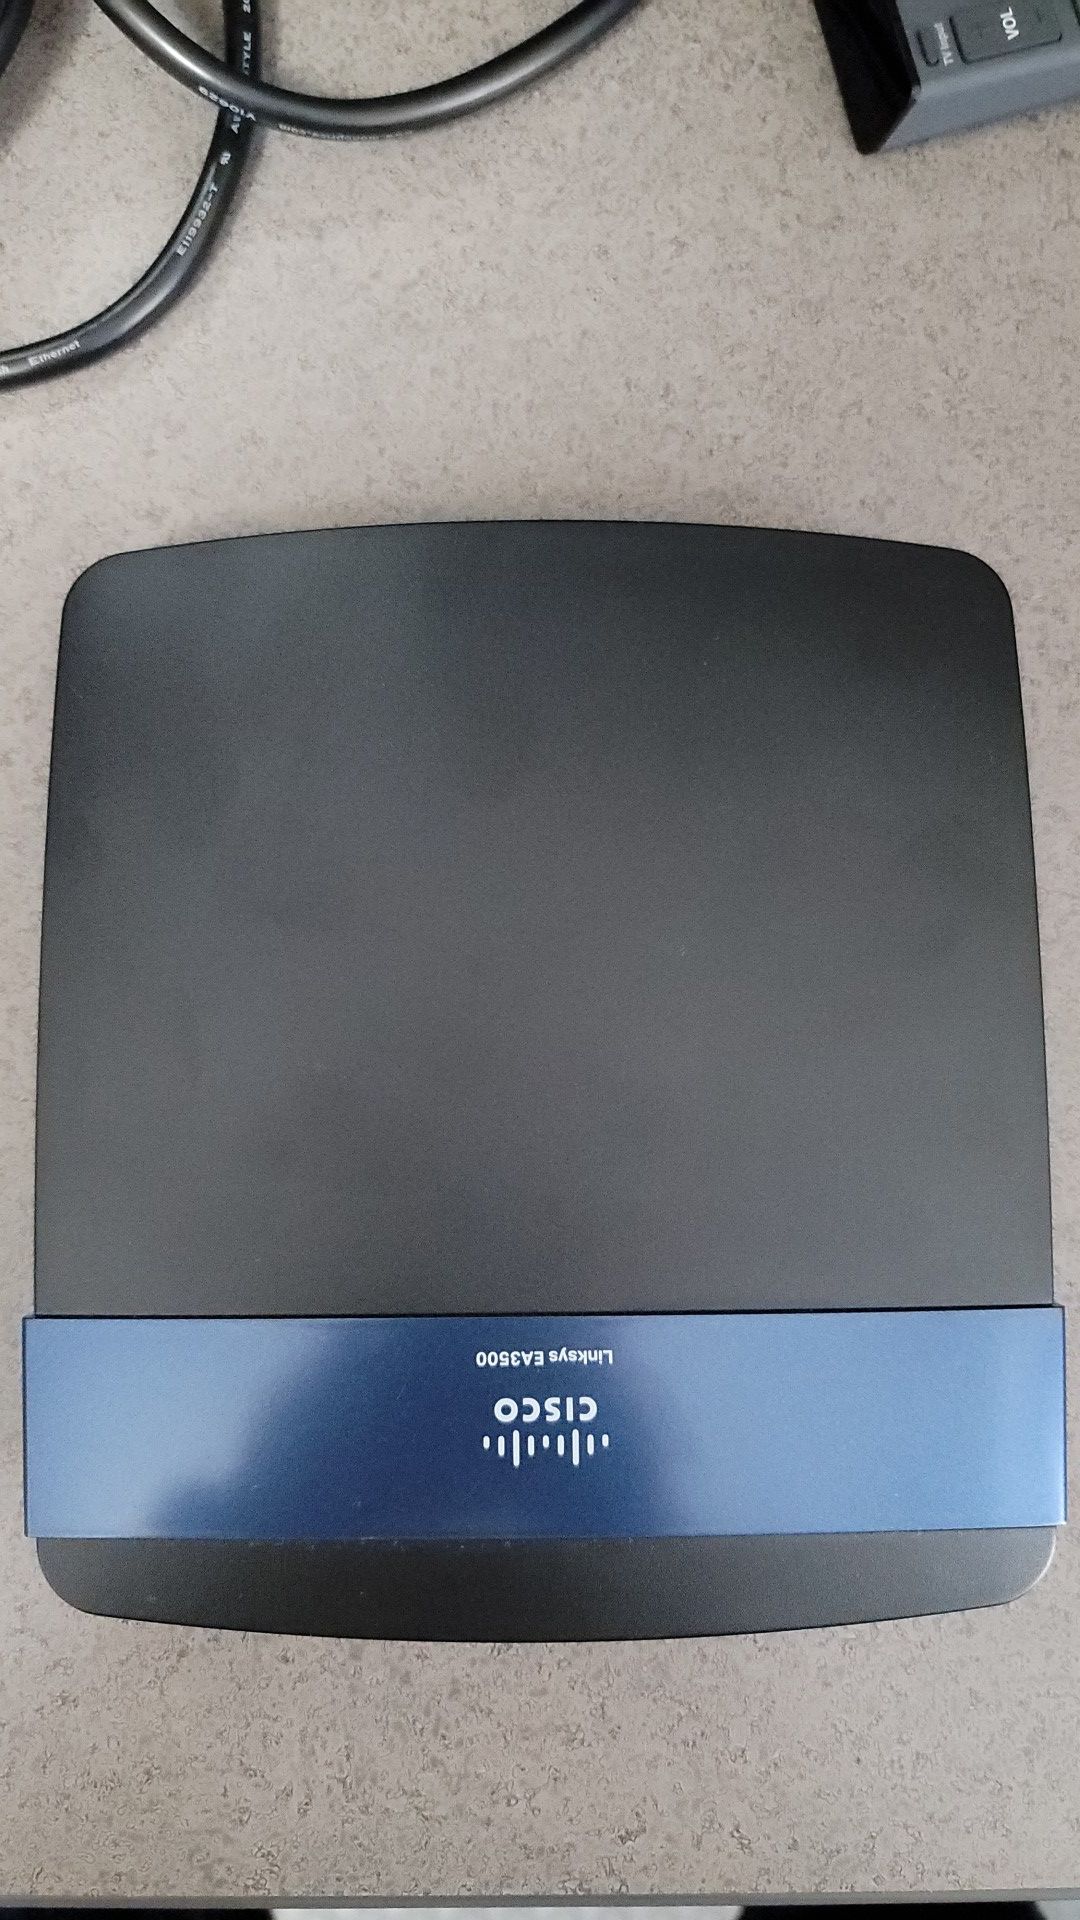 Linksys EA3500 Dual Band WIFI Router